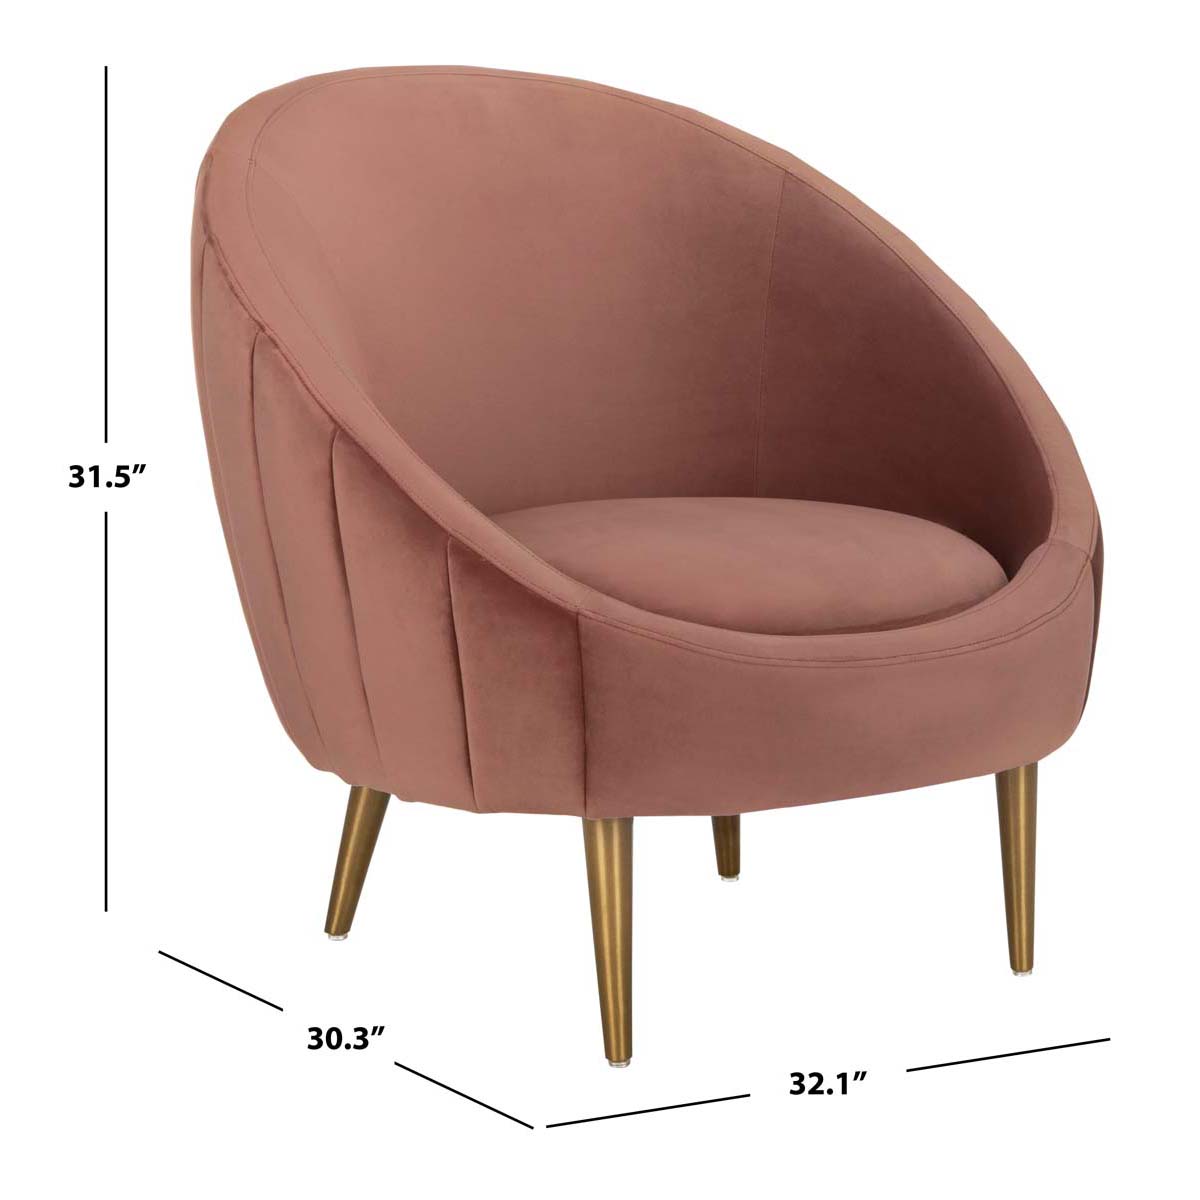 Safavieh Couture Razia Channel Tufted Tub Chair - Dusty Rose